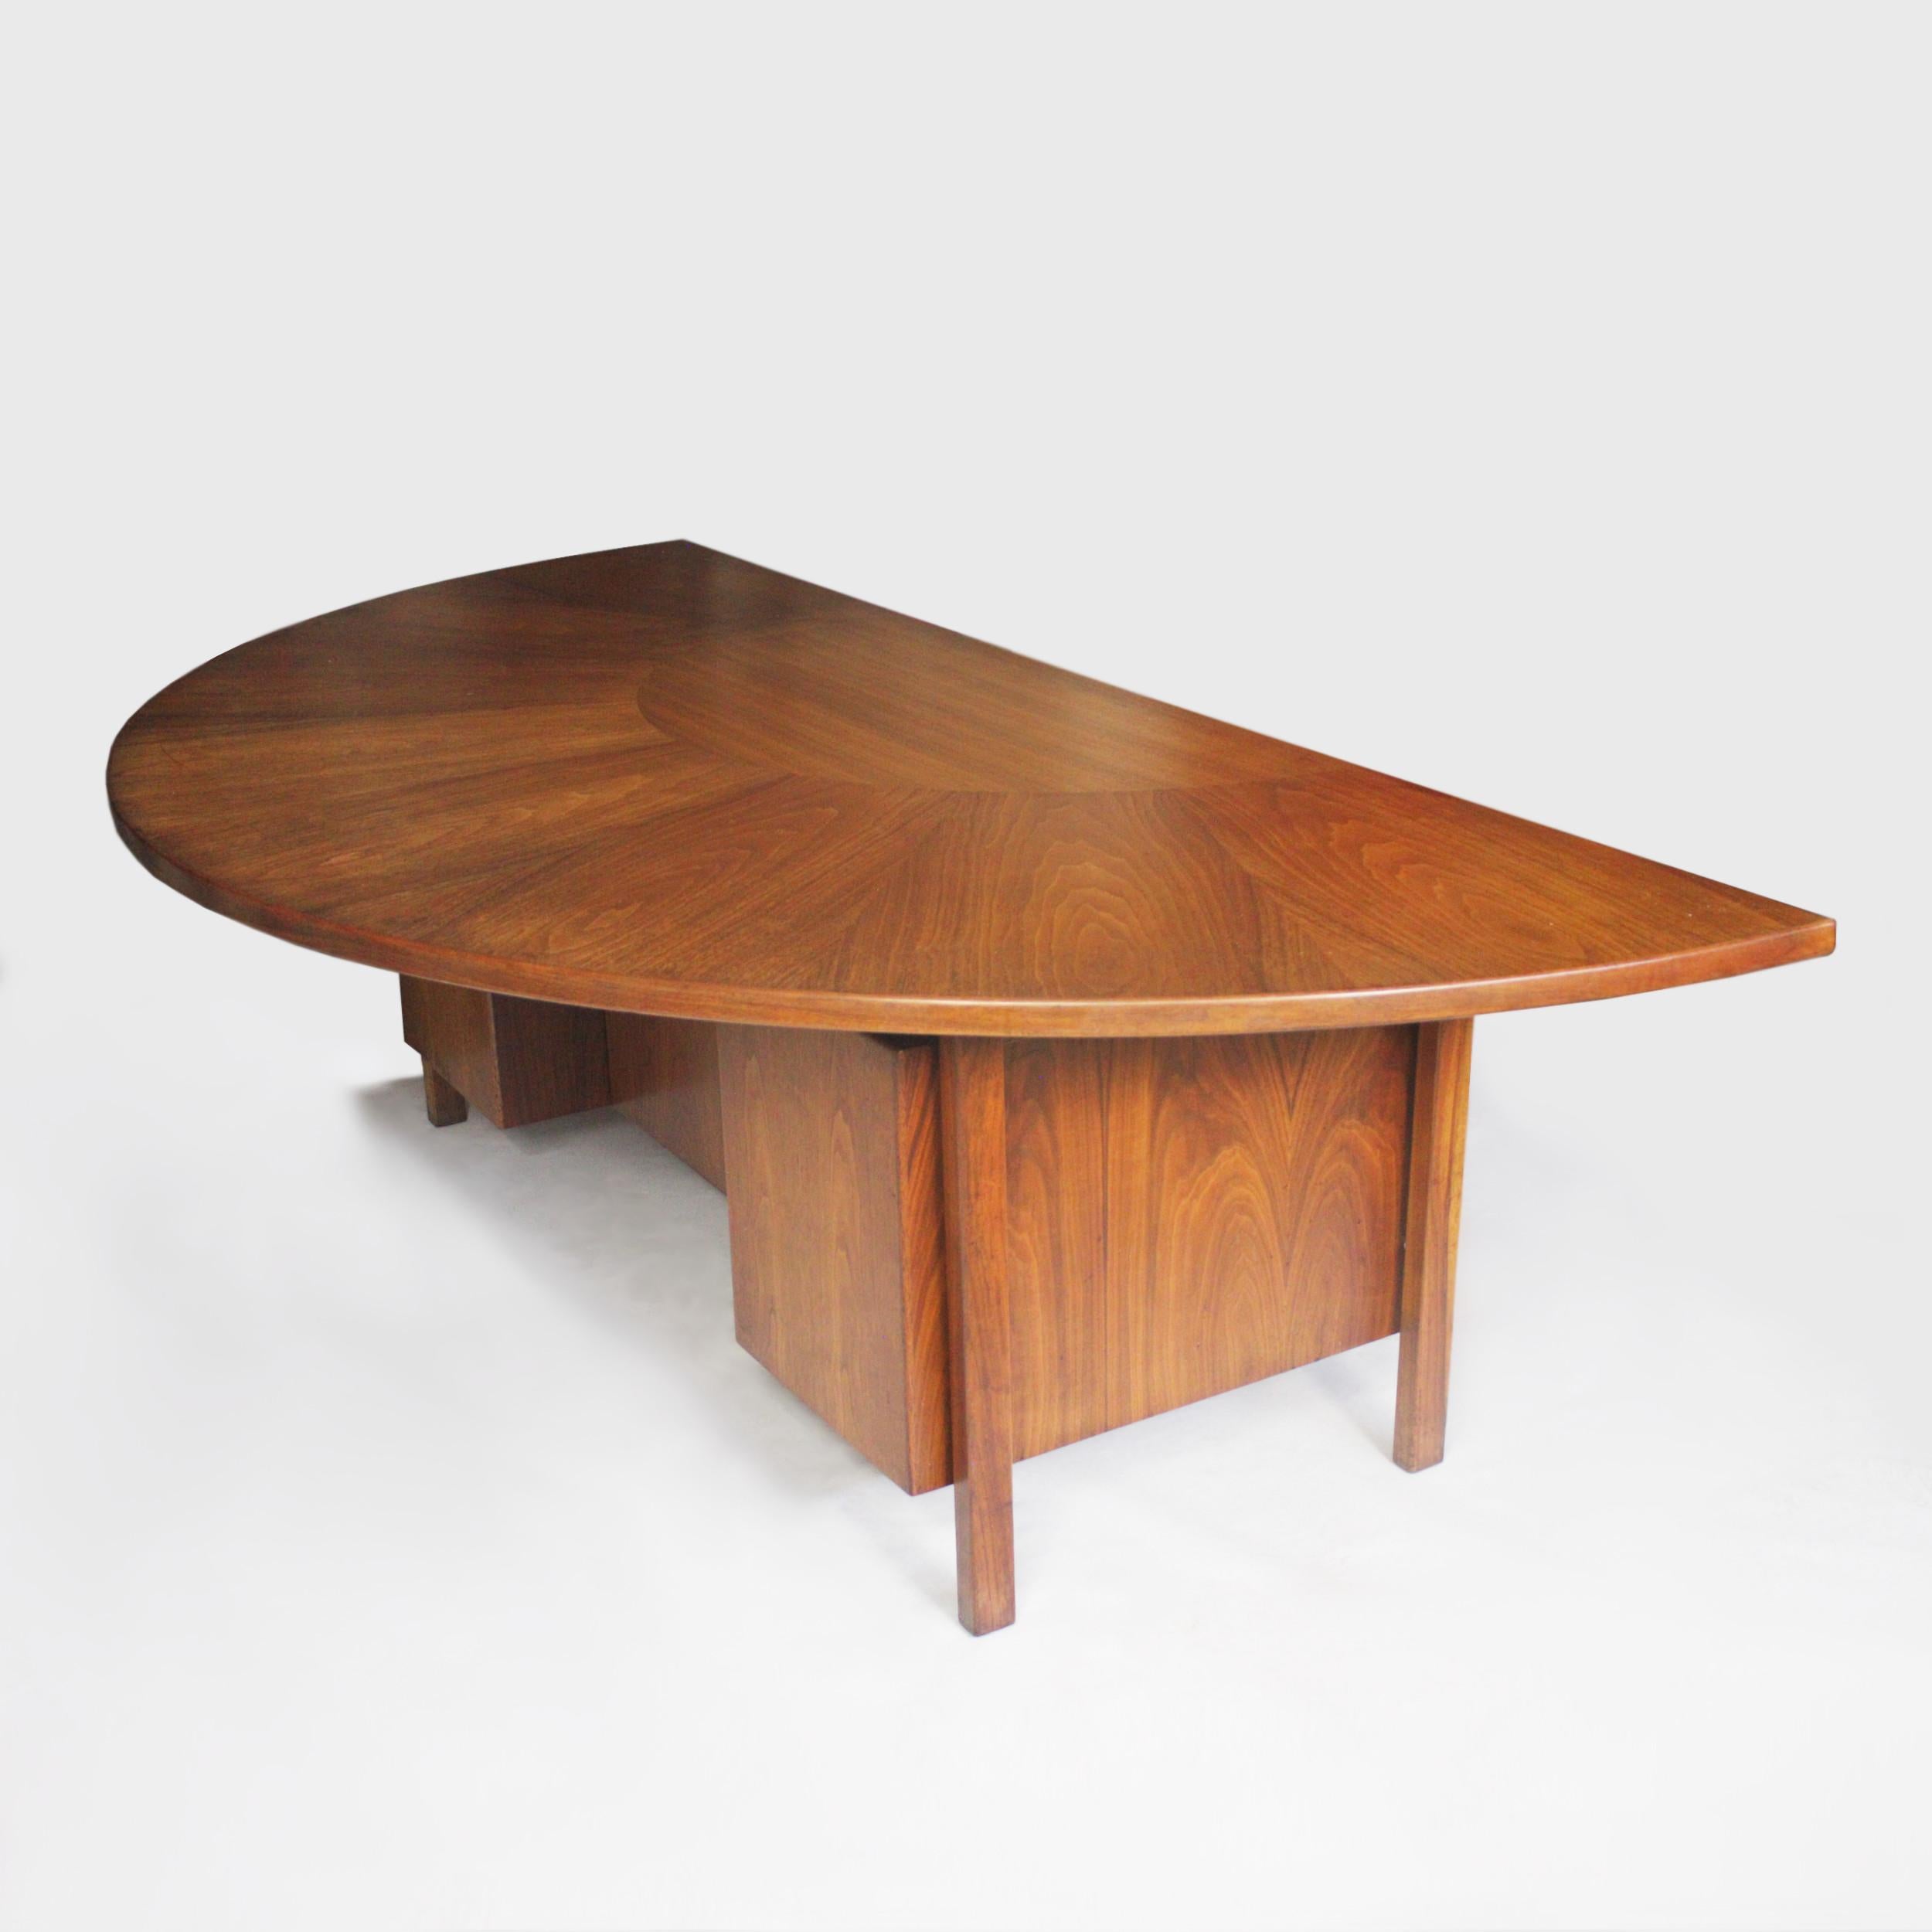 Spectacular Mid-Century Modern Walnut Demilune Executive Desk by Jens Risom In Good Condition For Sale In Lafayette, IN